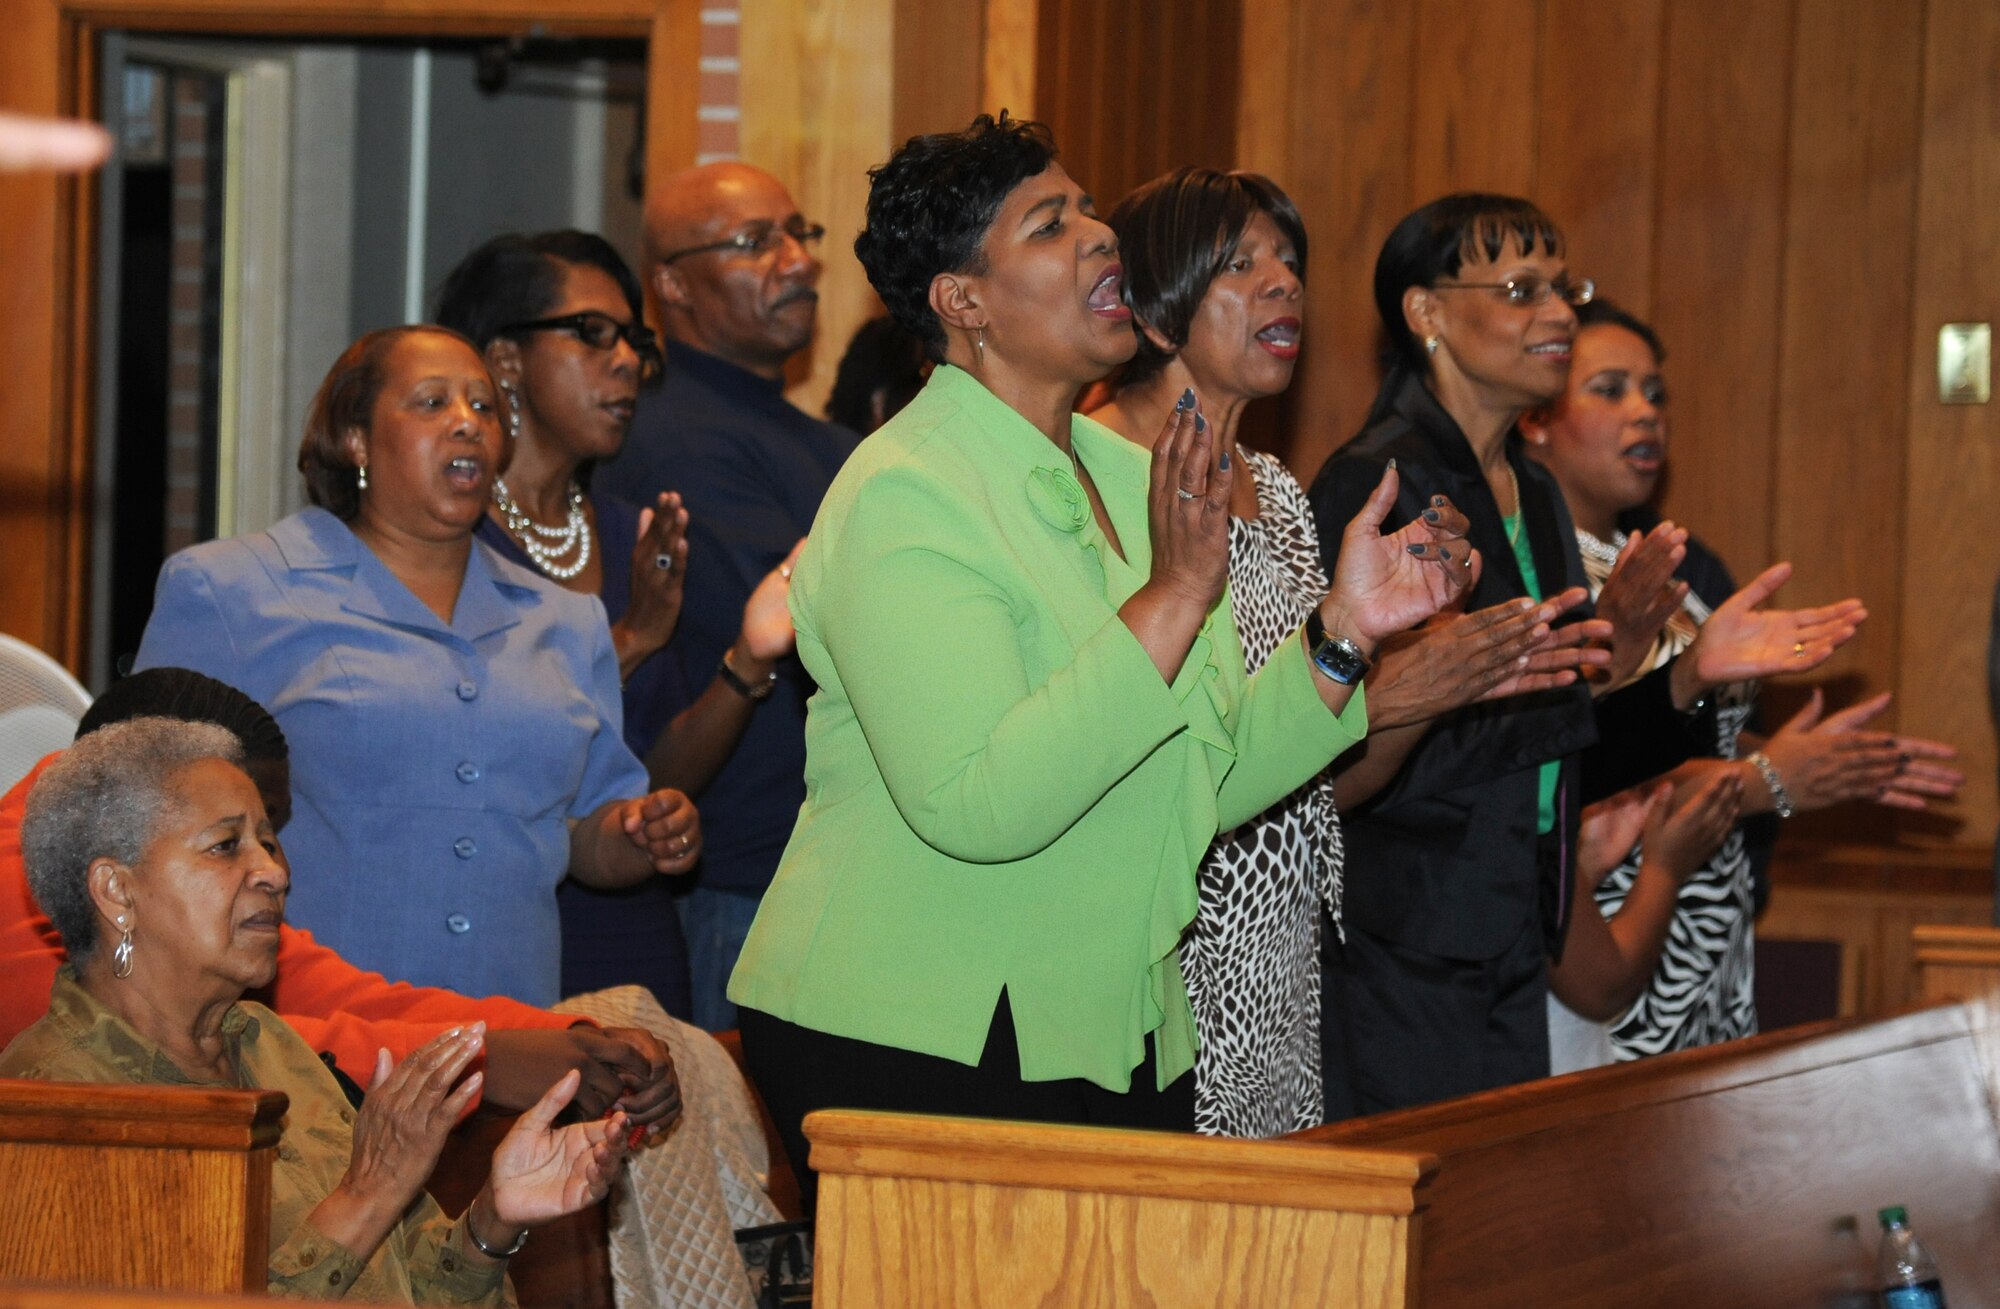 Attendees sing along with a choir performance during the Gospel Concert Jan. 31, 2015, at the Triangle Chapel, Keesler Air Force Base, Miss.    The African American Heritage Committee hosted the praise and worship service to celebrate Black History Month. (U.S. Air Force photo by Kemberly Groue)